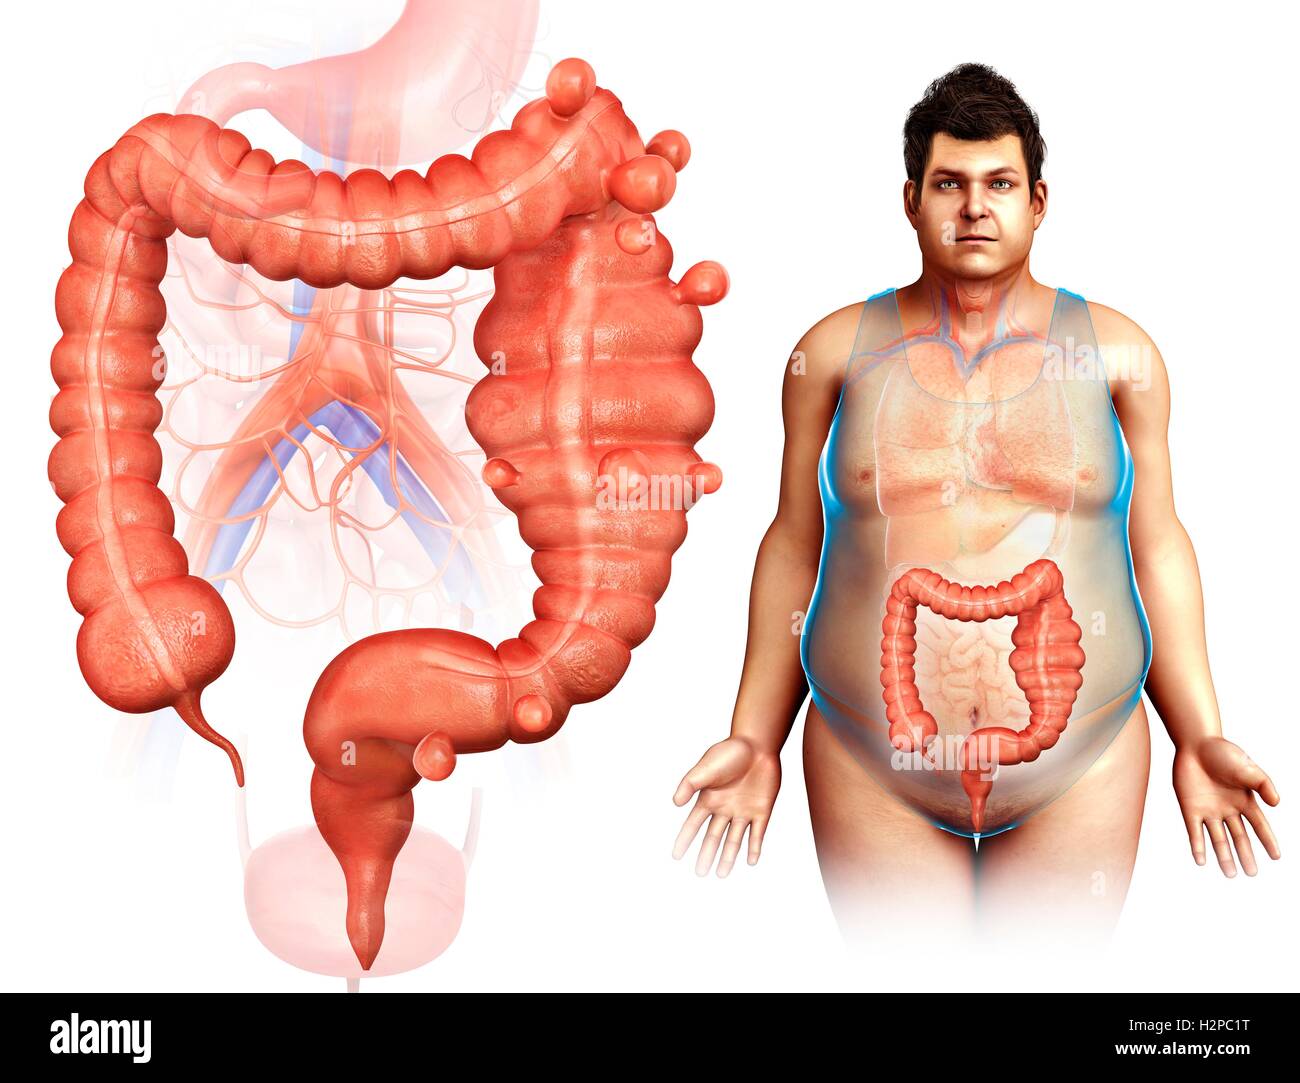 Illustration of a man with diverticulosis and mega colon. Stock Photo